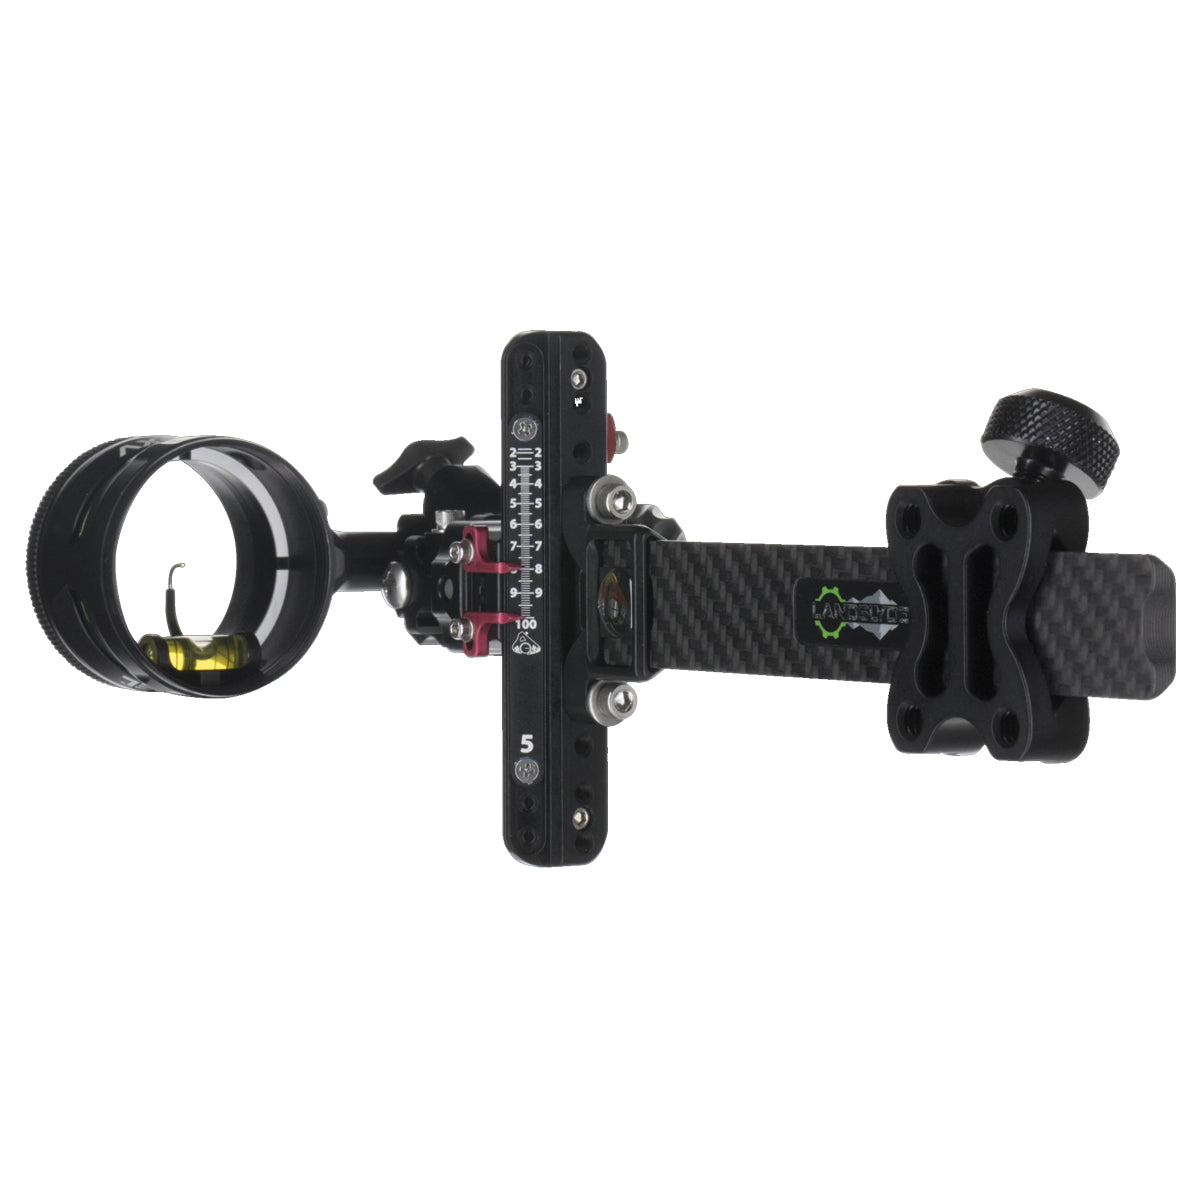 Axcel Landslyde Plus Carbon Pro Slider Sight AV-41 Scope 1 Pin Bow Sight in  by GOHUNT | Axcel - GOHUNT Shop